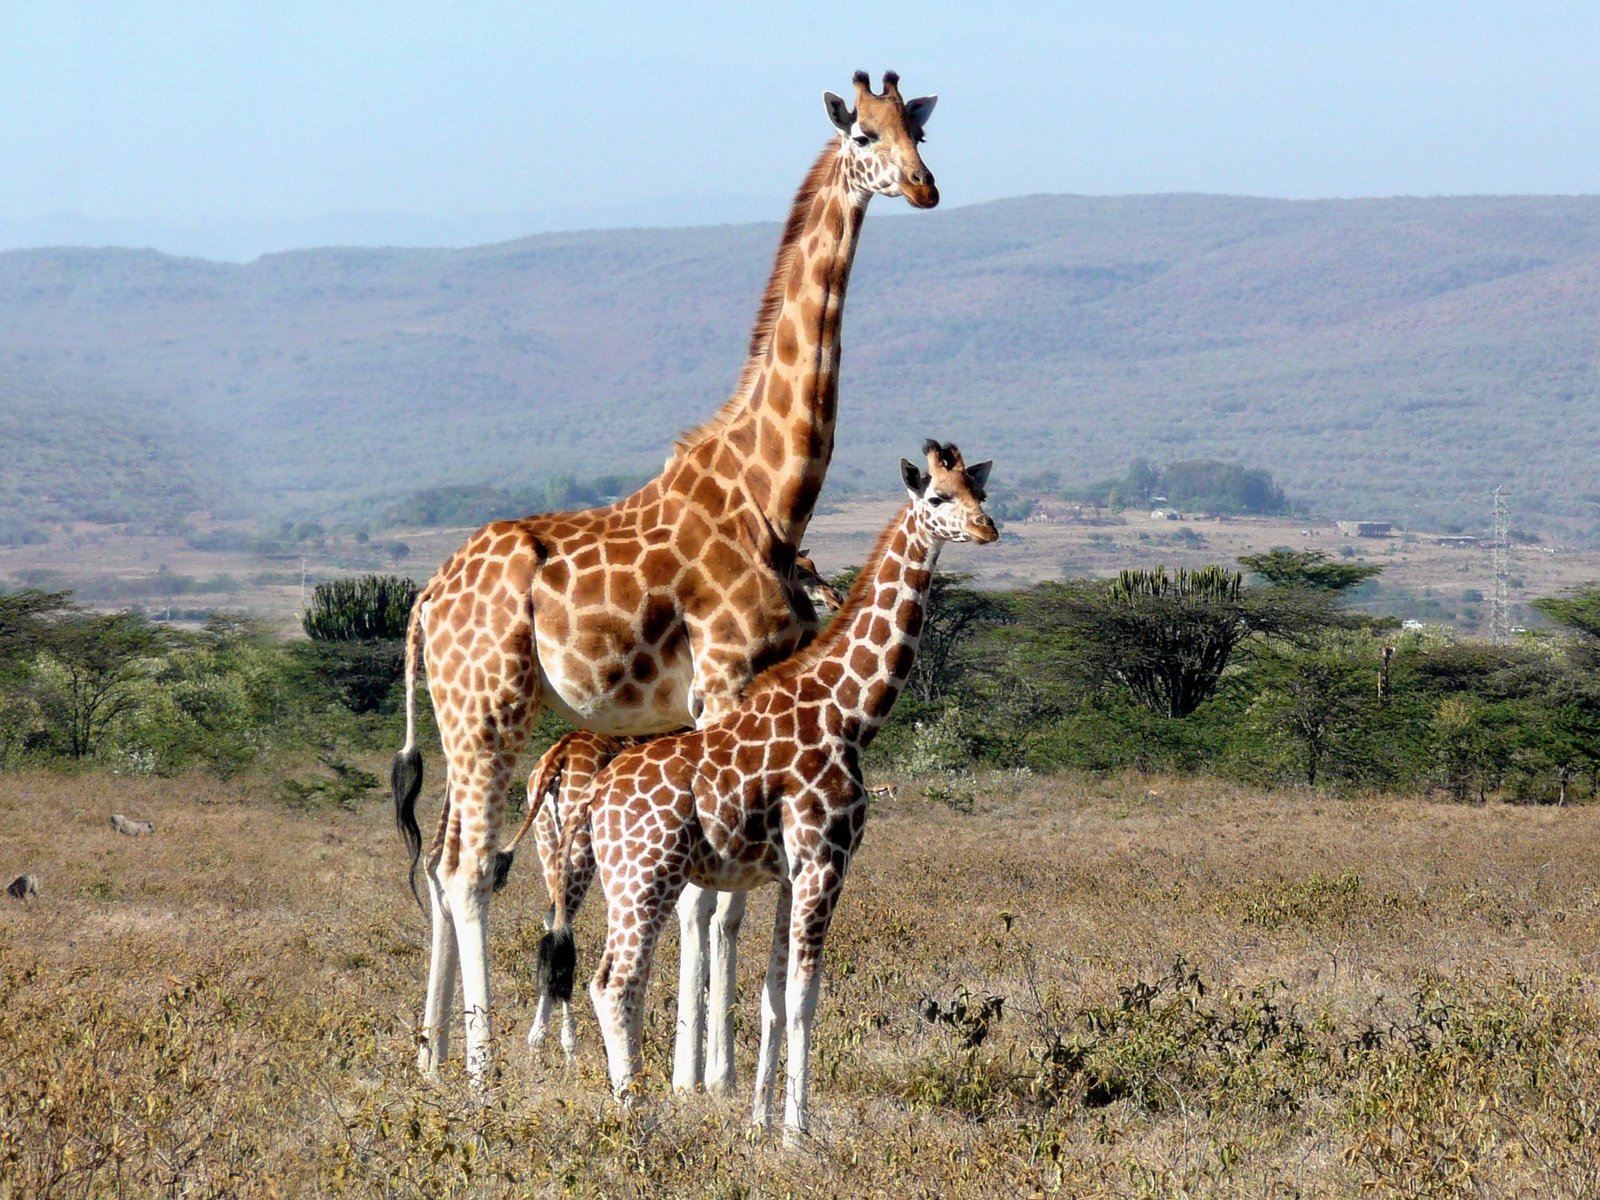 Scientists Identify Unexpected Drivers Behind Giraffes’ Long Necks